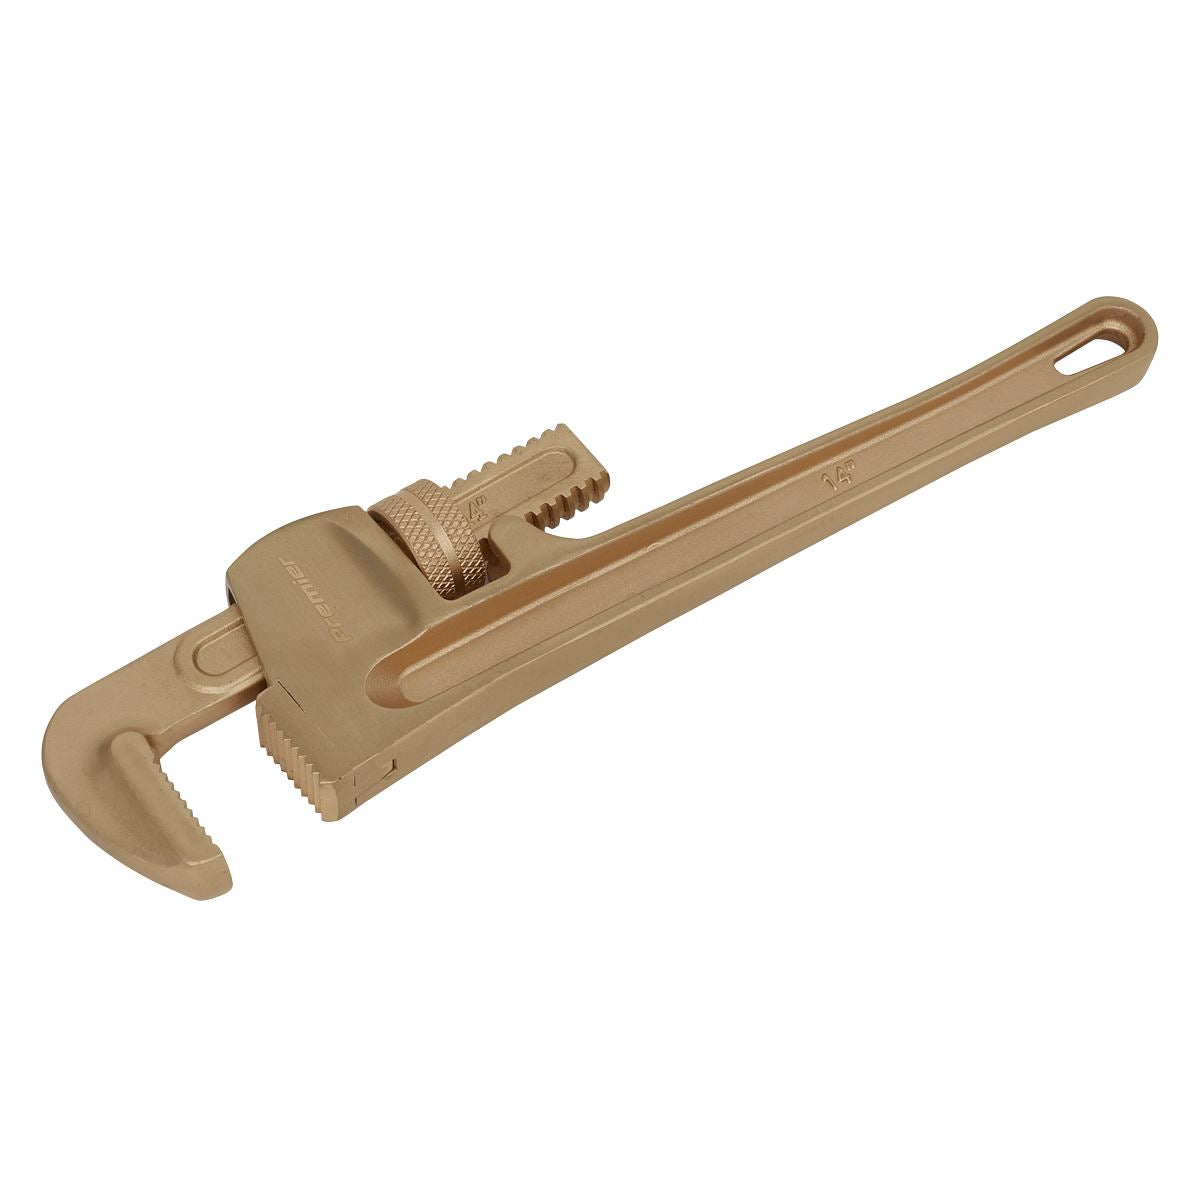 Sealey Premier Pipe Wrench 350mm - Non-Sparking